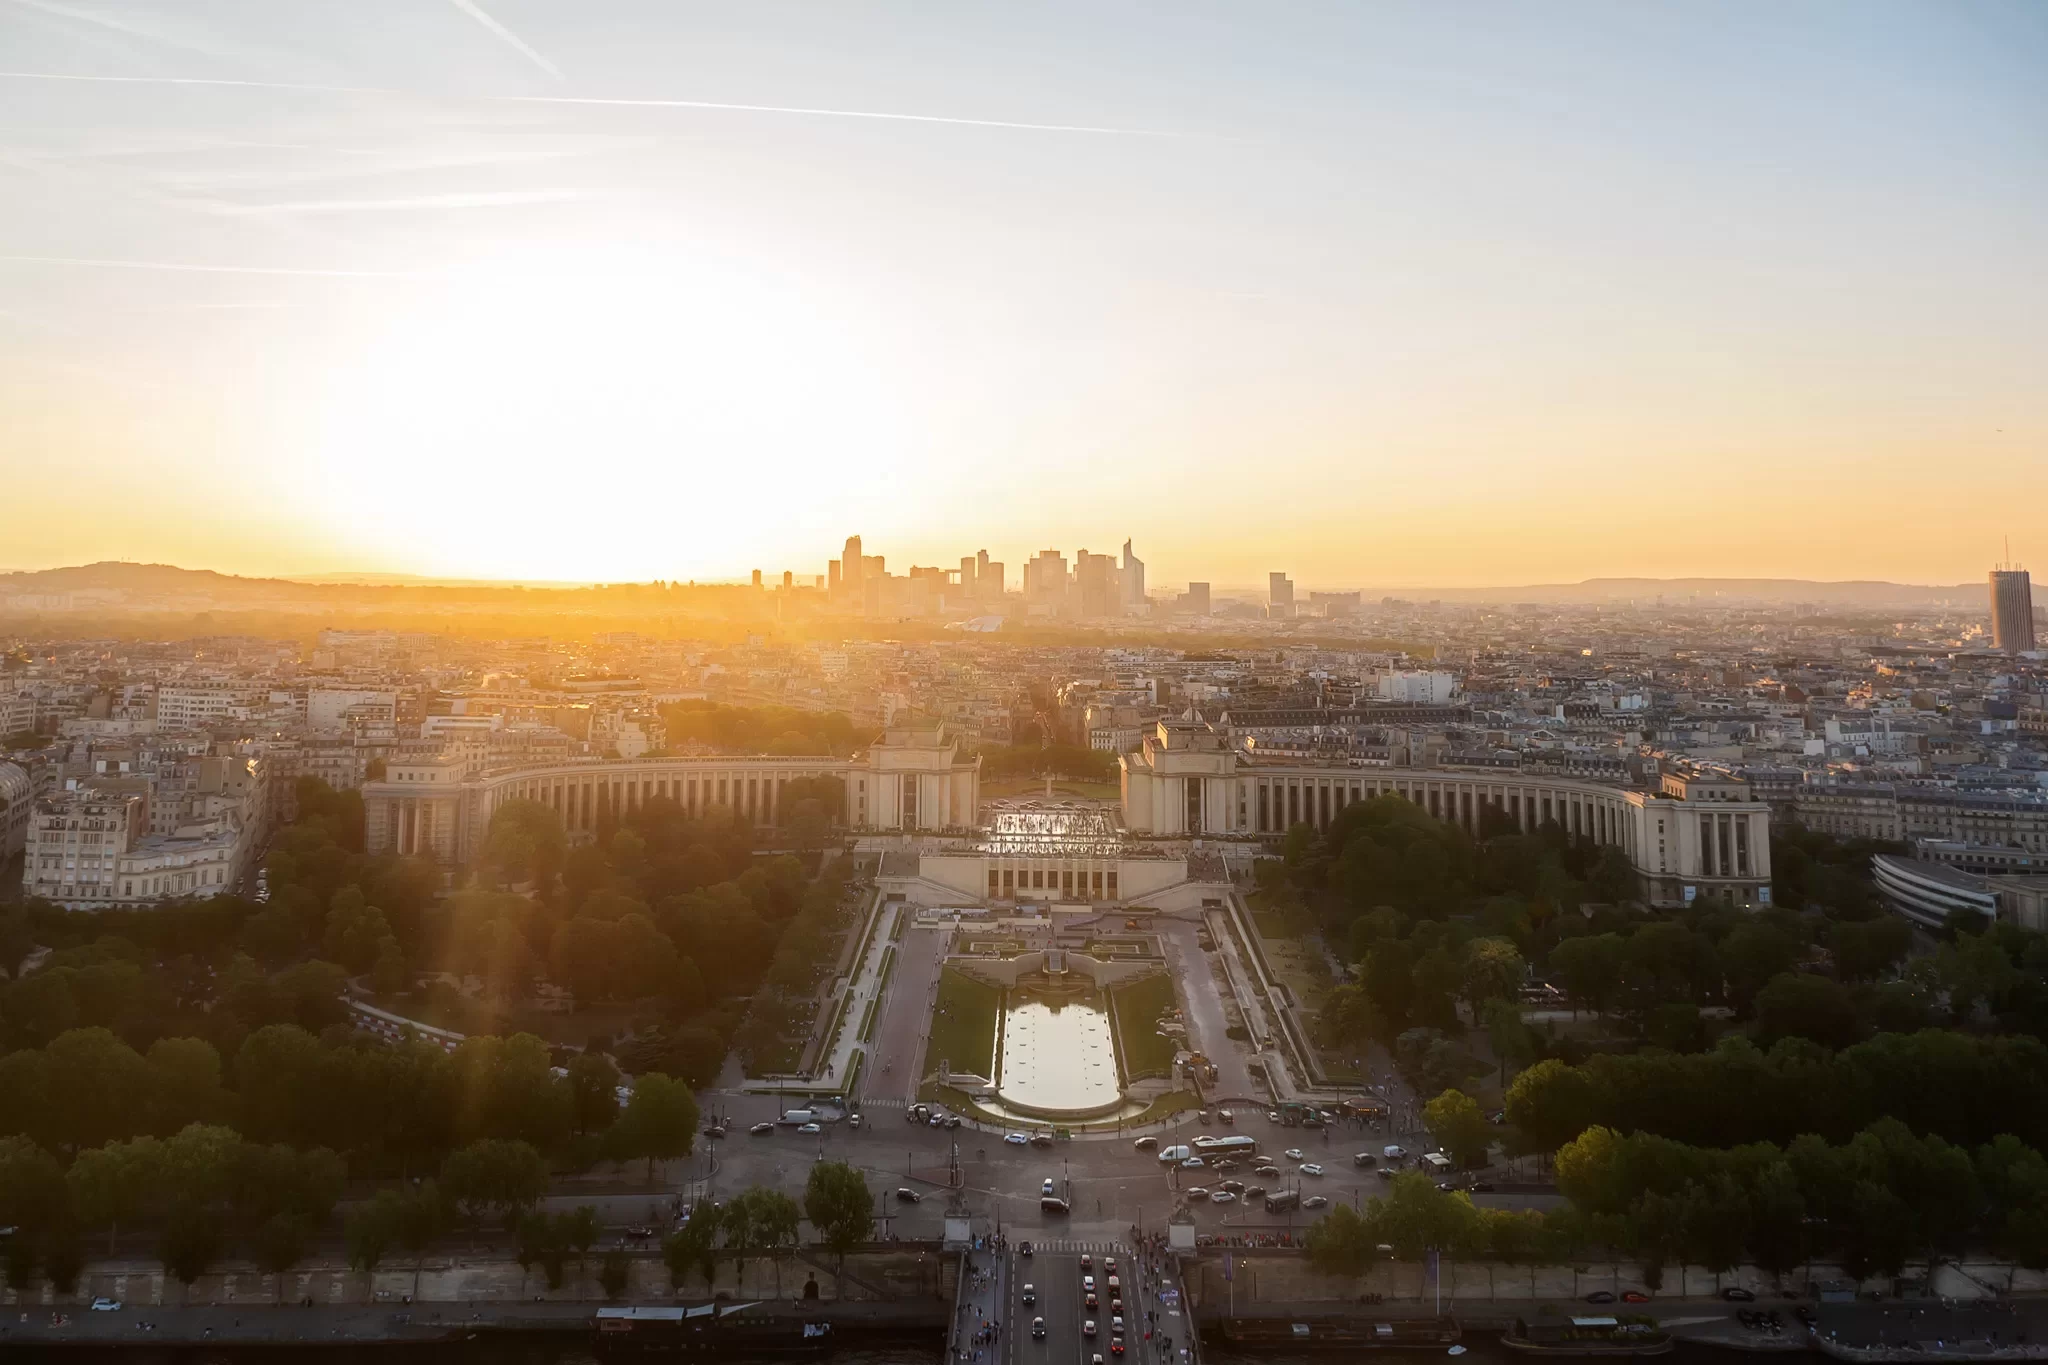 Views from the 2nd floor of the Eiffel Tower at sunset